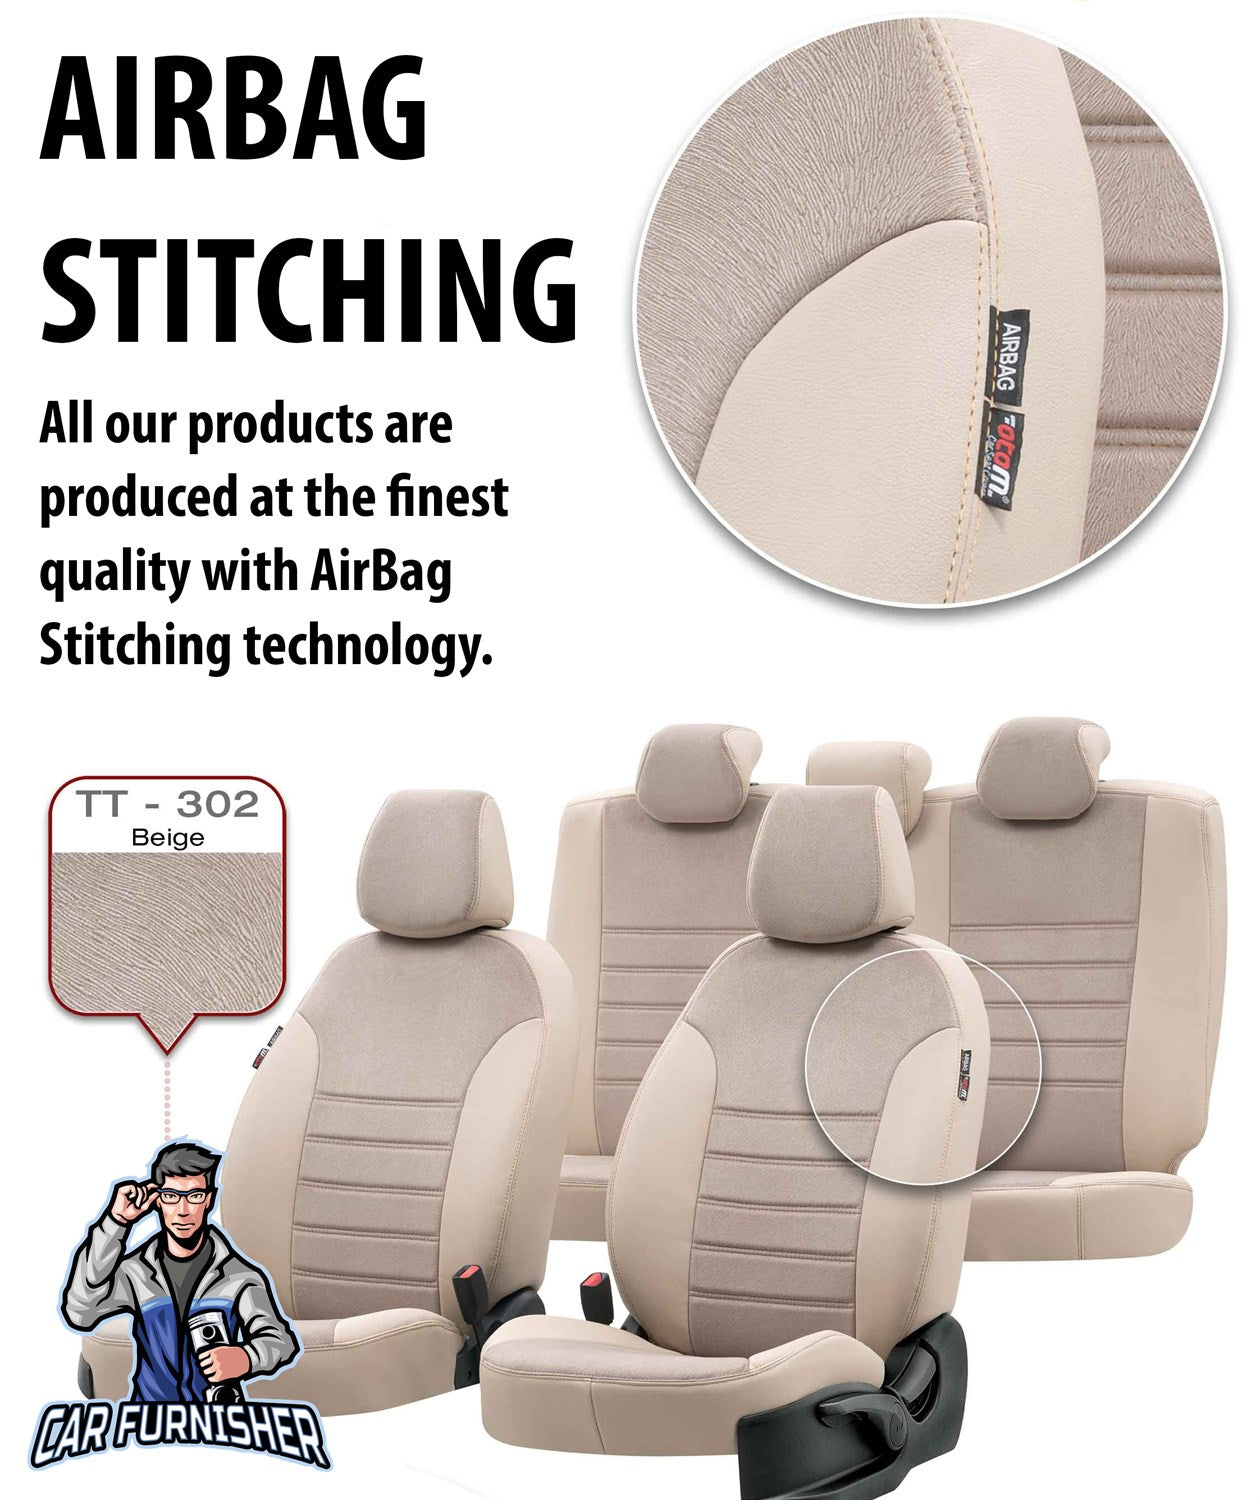 Isuzu N35 Seat Cover London Foal Feather Design Beige Leather & Foal Feather